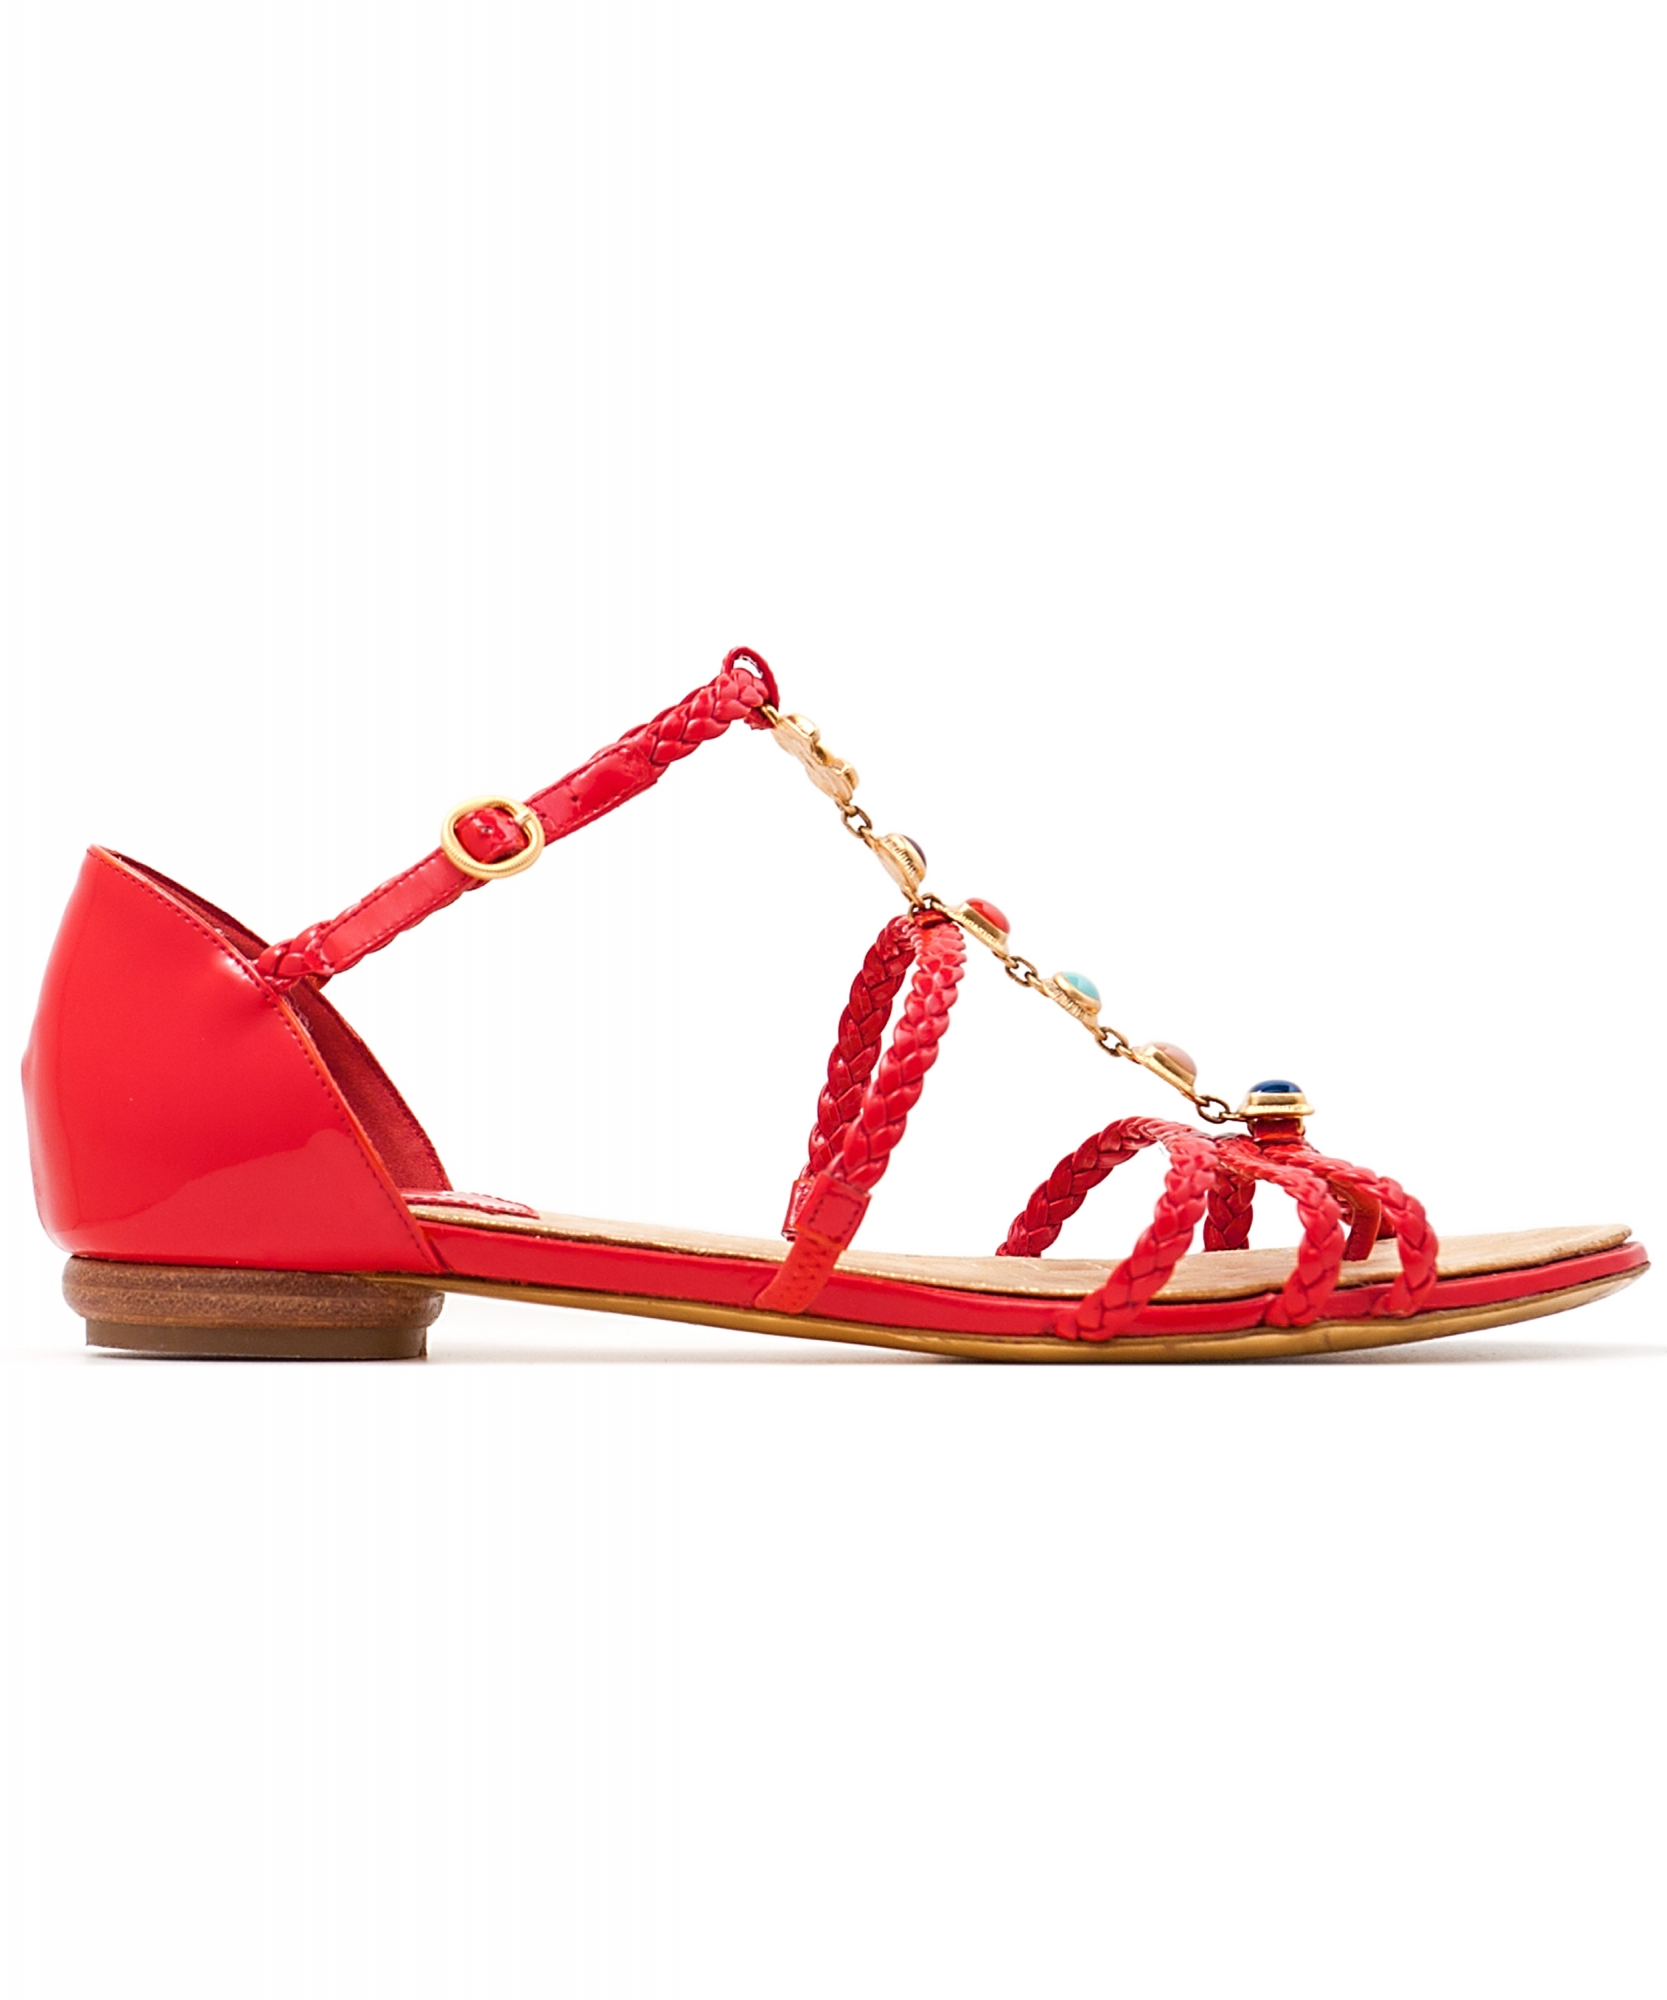 Red Chanel Patent Leather Braided Gripoix Stone Sandals - Chanel